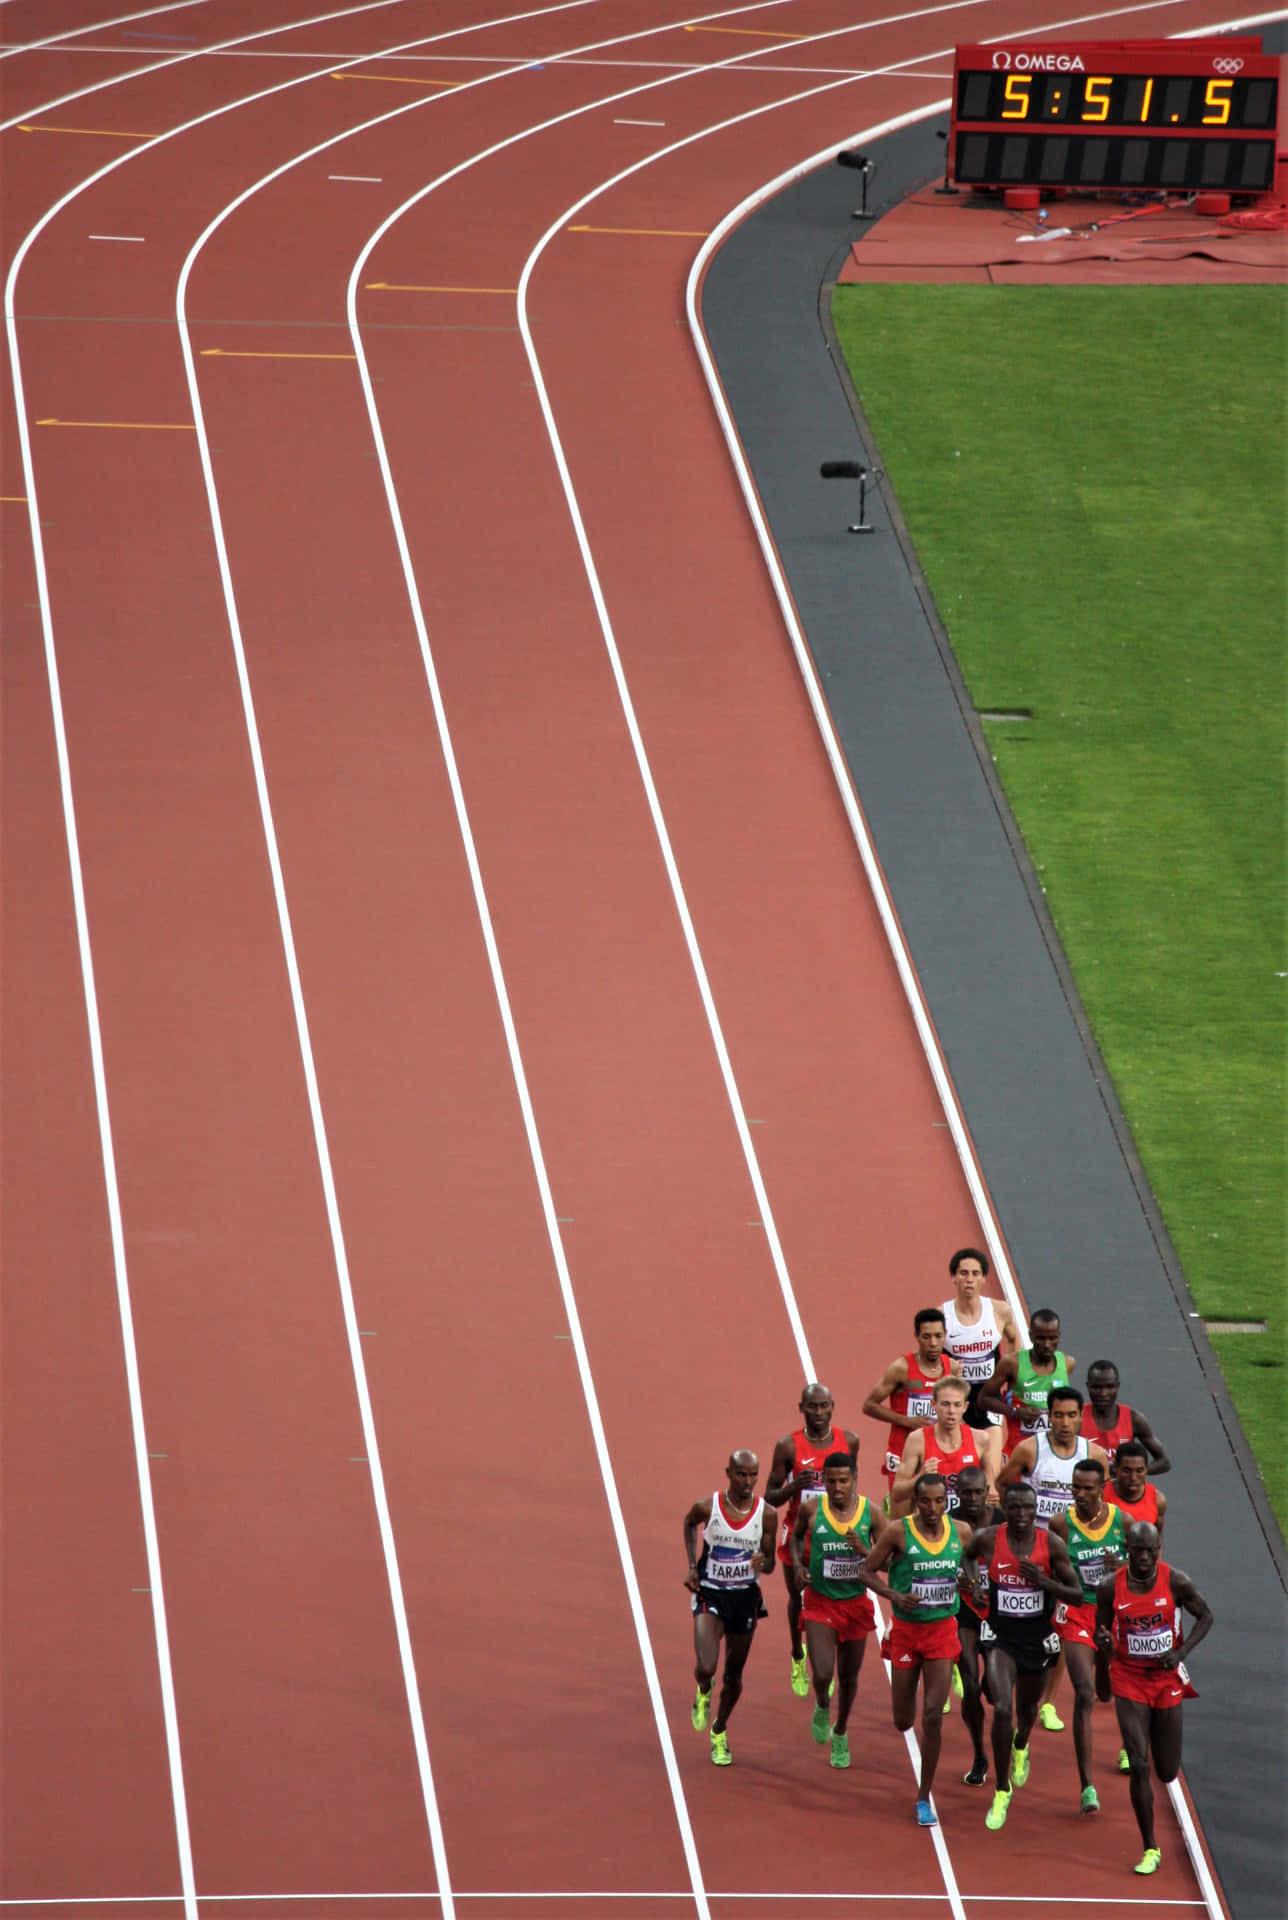 A Group Of People Running On A Track